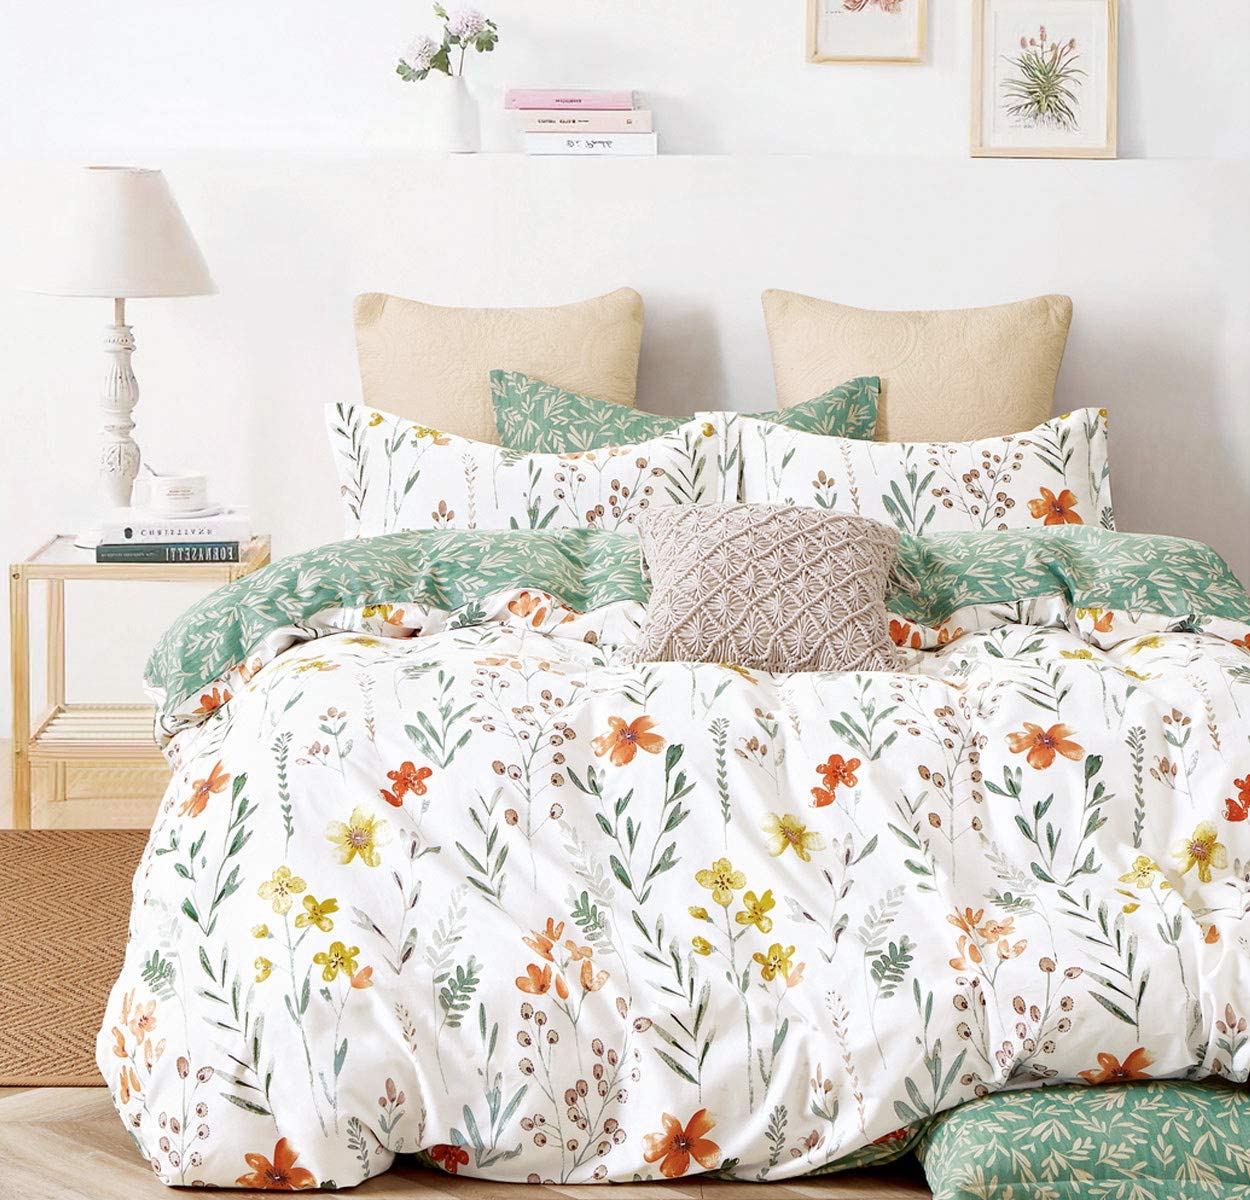 Price:$64.99  Duvet Cover Queen, 600 Thread Count Cotton 3pcs Bedding Set Yellow Flowers and Green Branches Printed on White Reversible Comforter Cover : Home & Kitchen